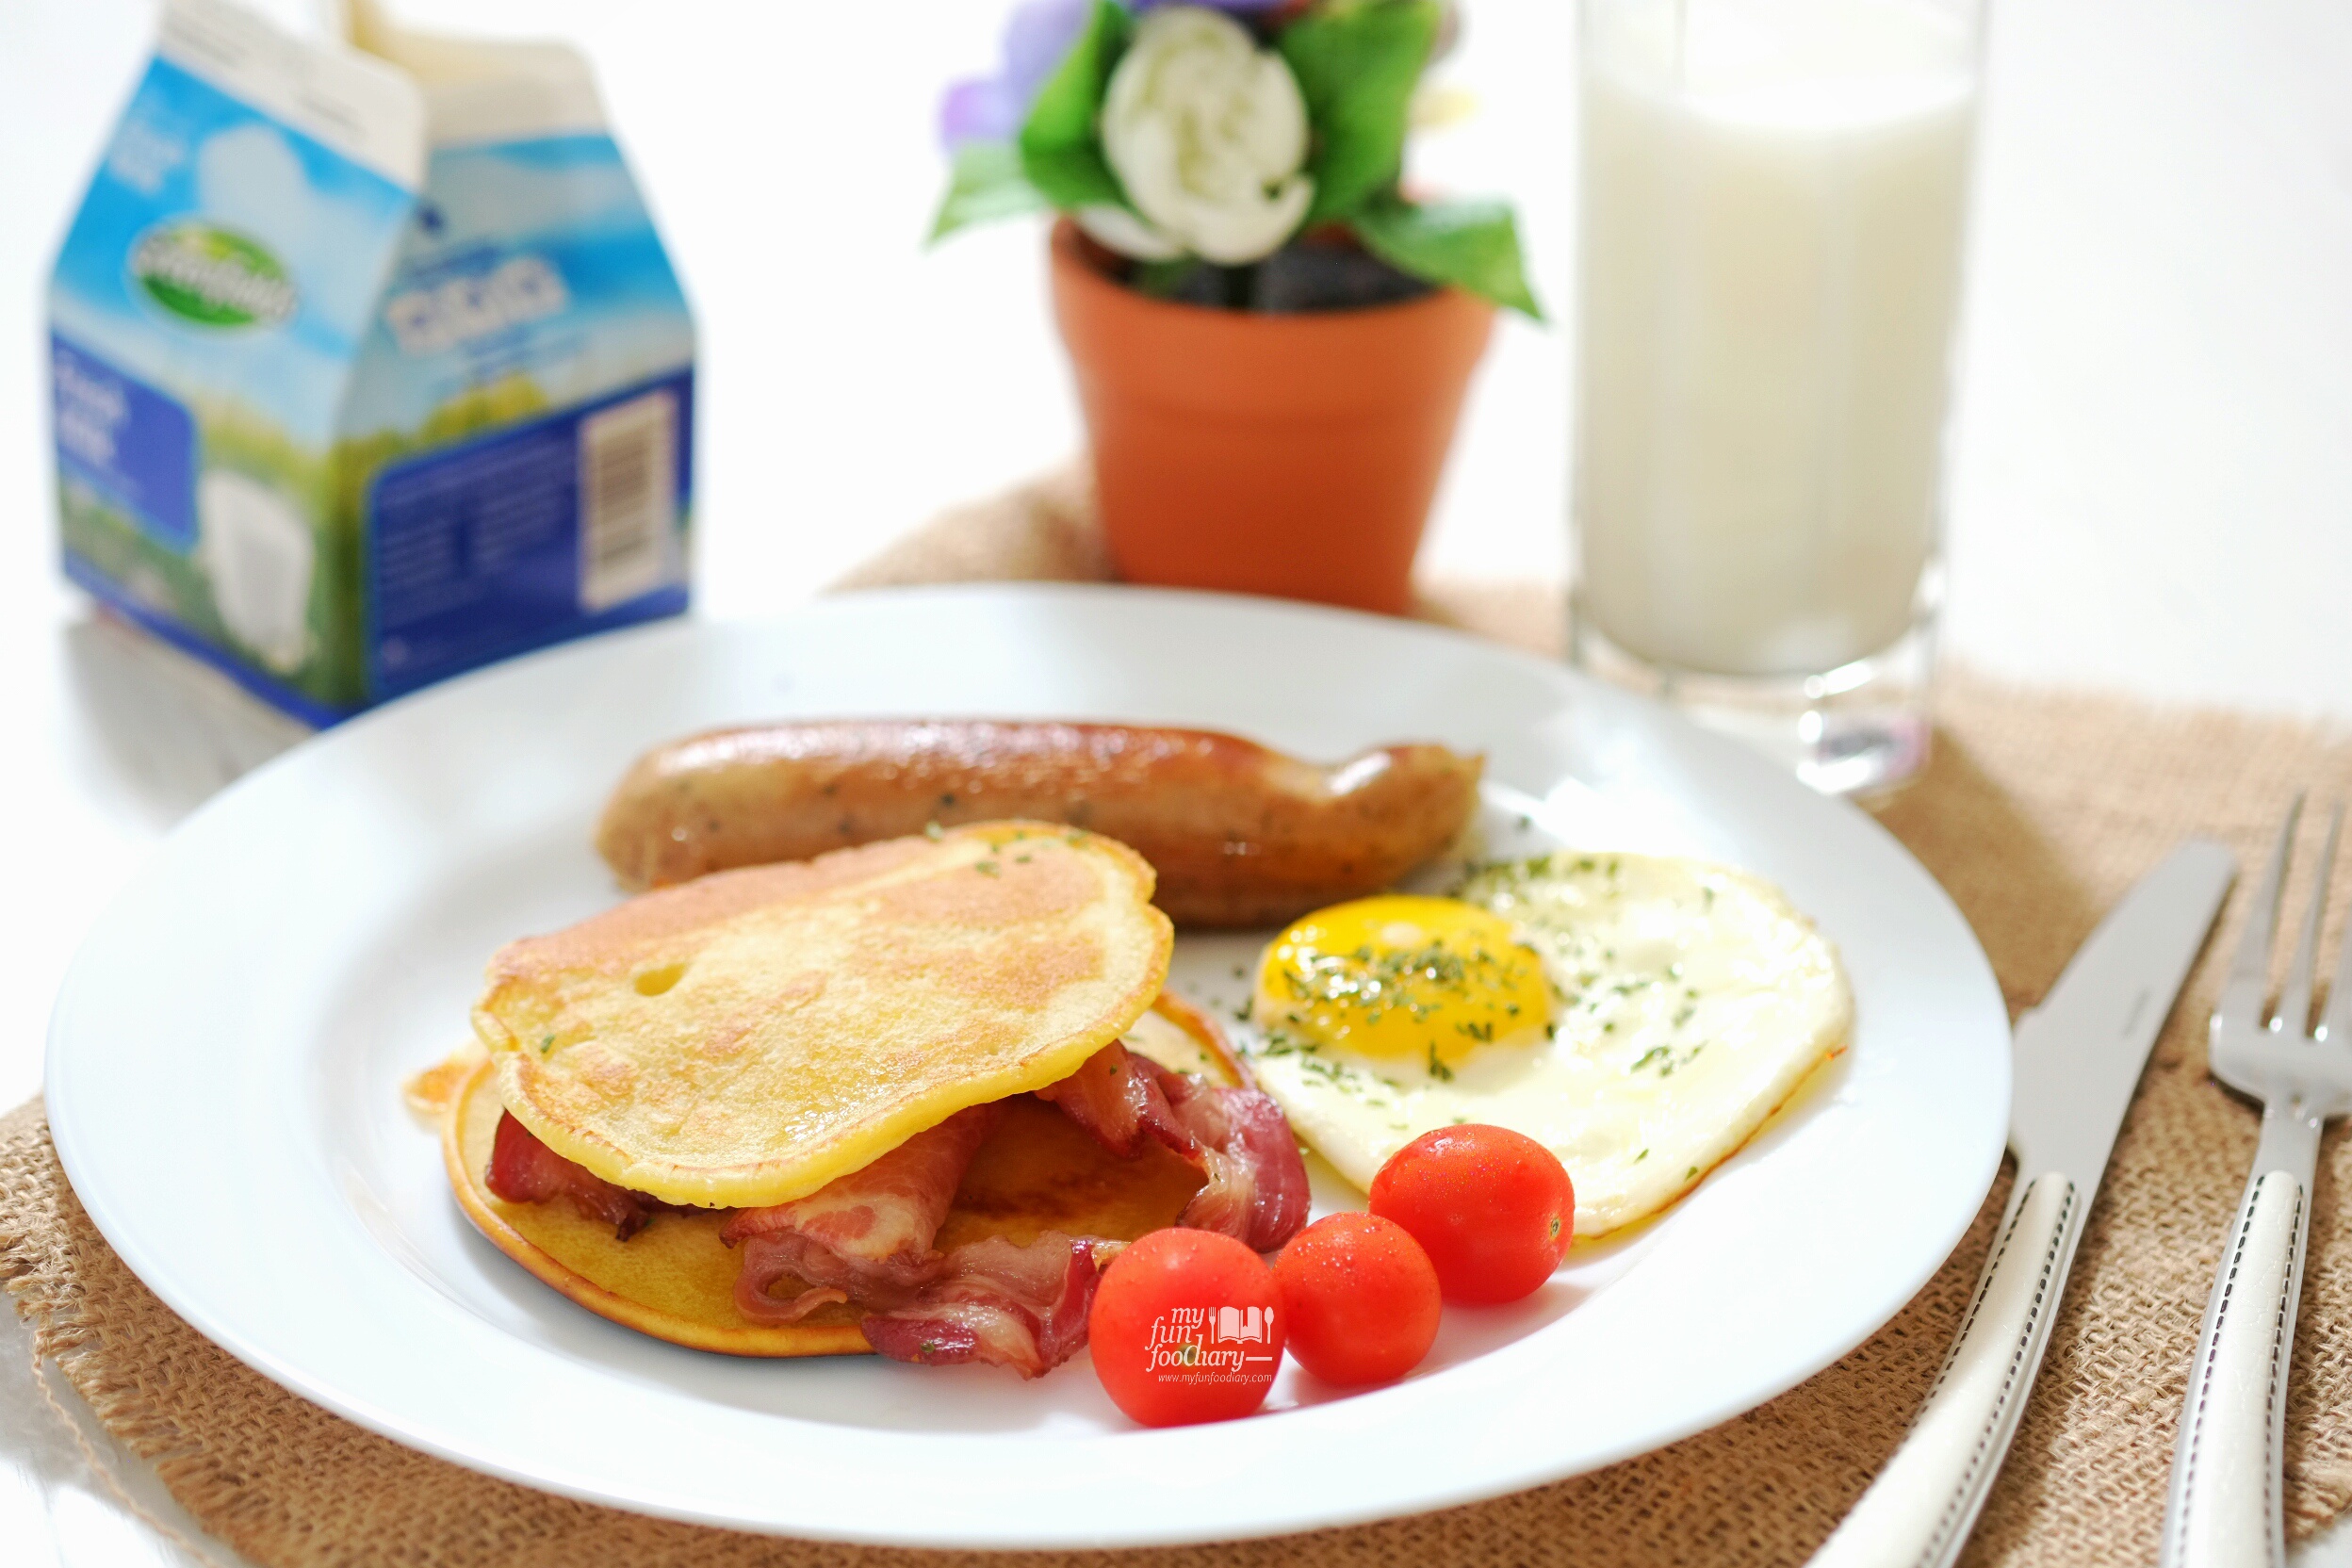 [RECIPE] Pancakes with Pork Bacon, Sausage and Sunny Side Up